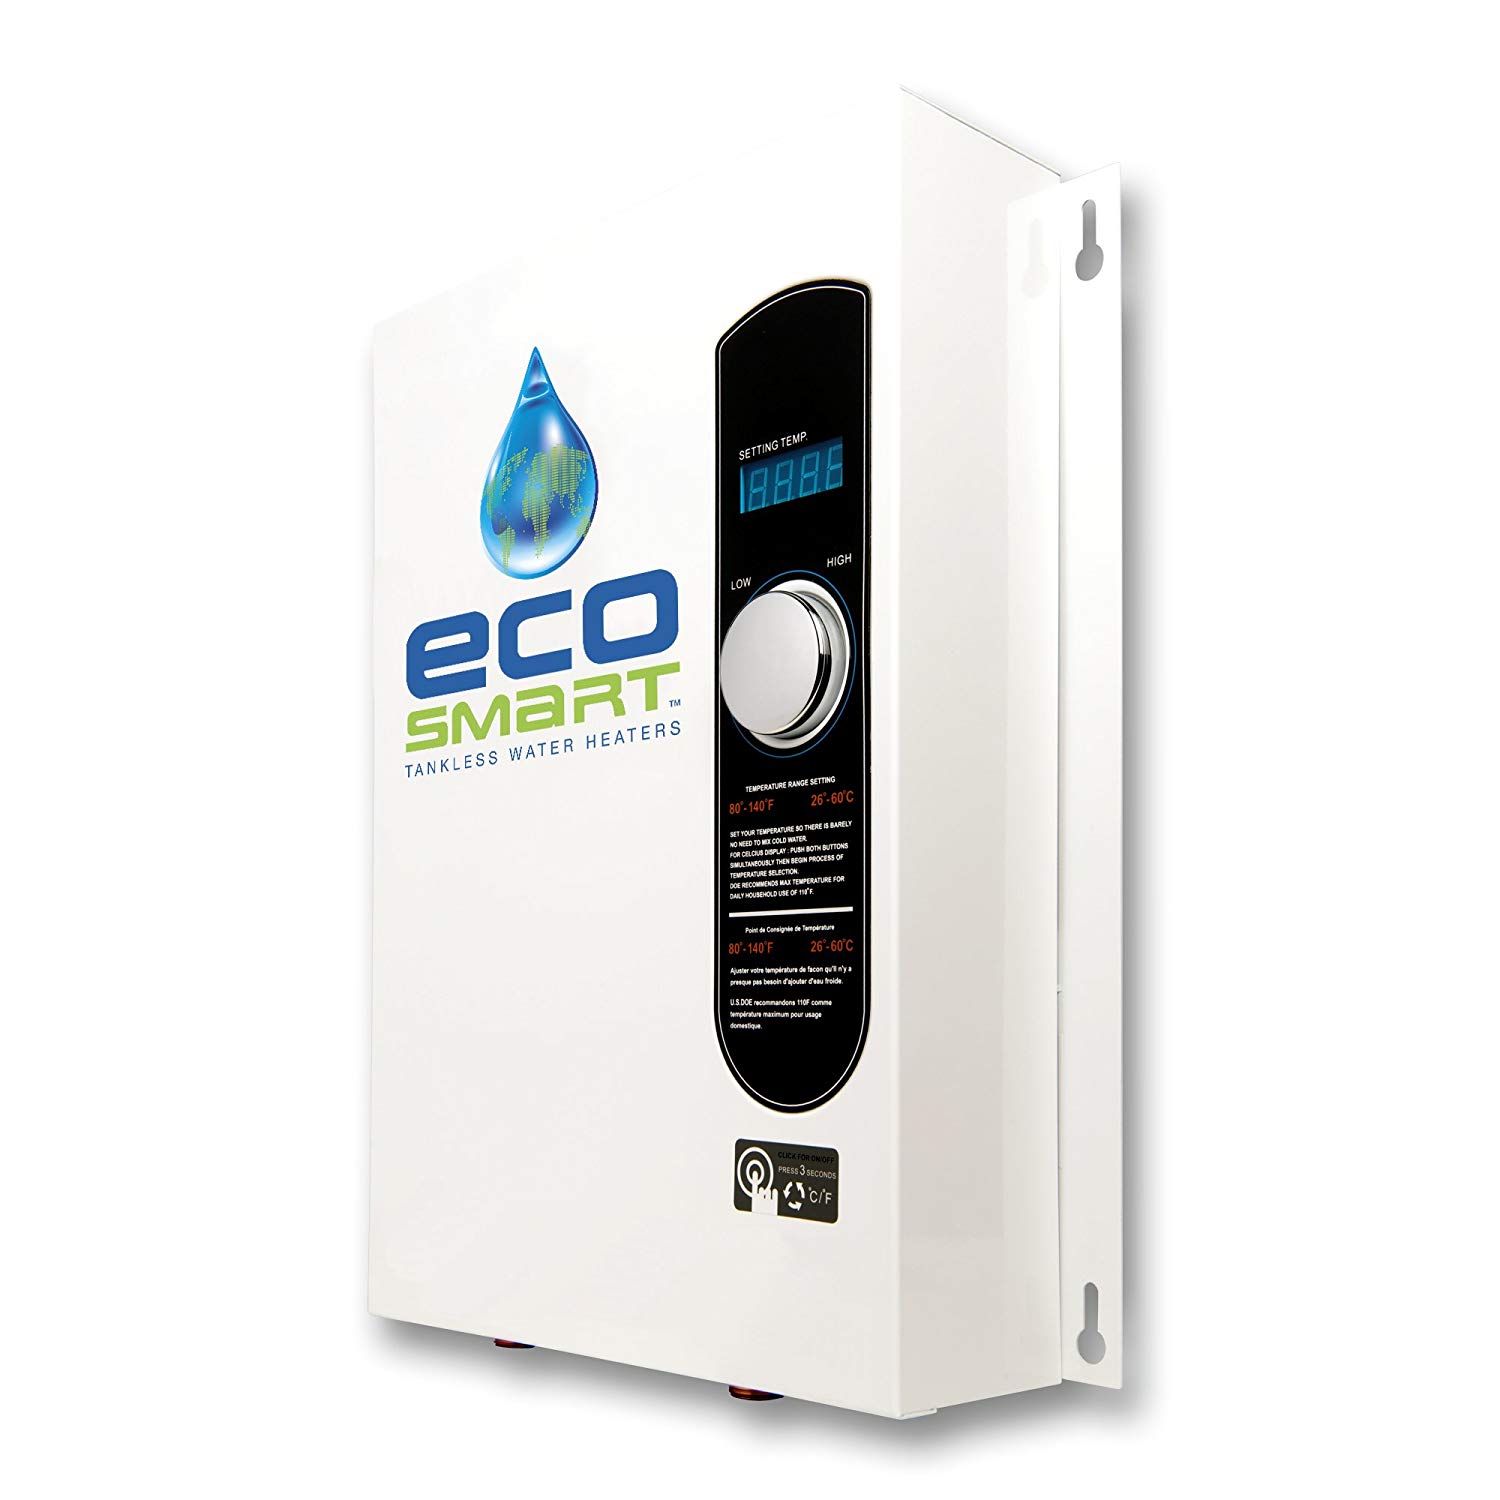 Best Electric Water Heater 2020 Reviews, Buying Guide & More